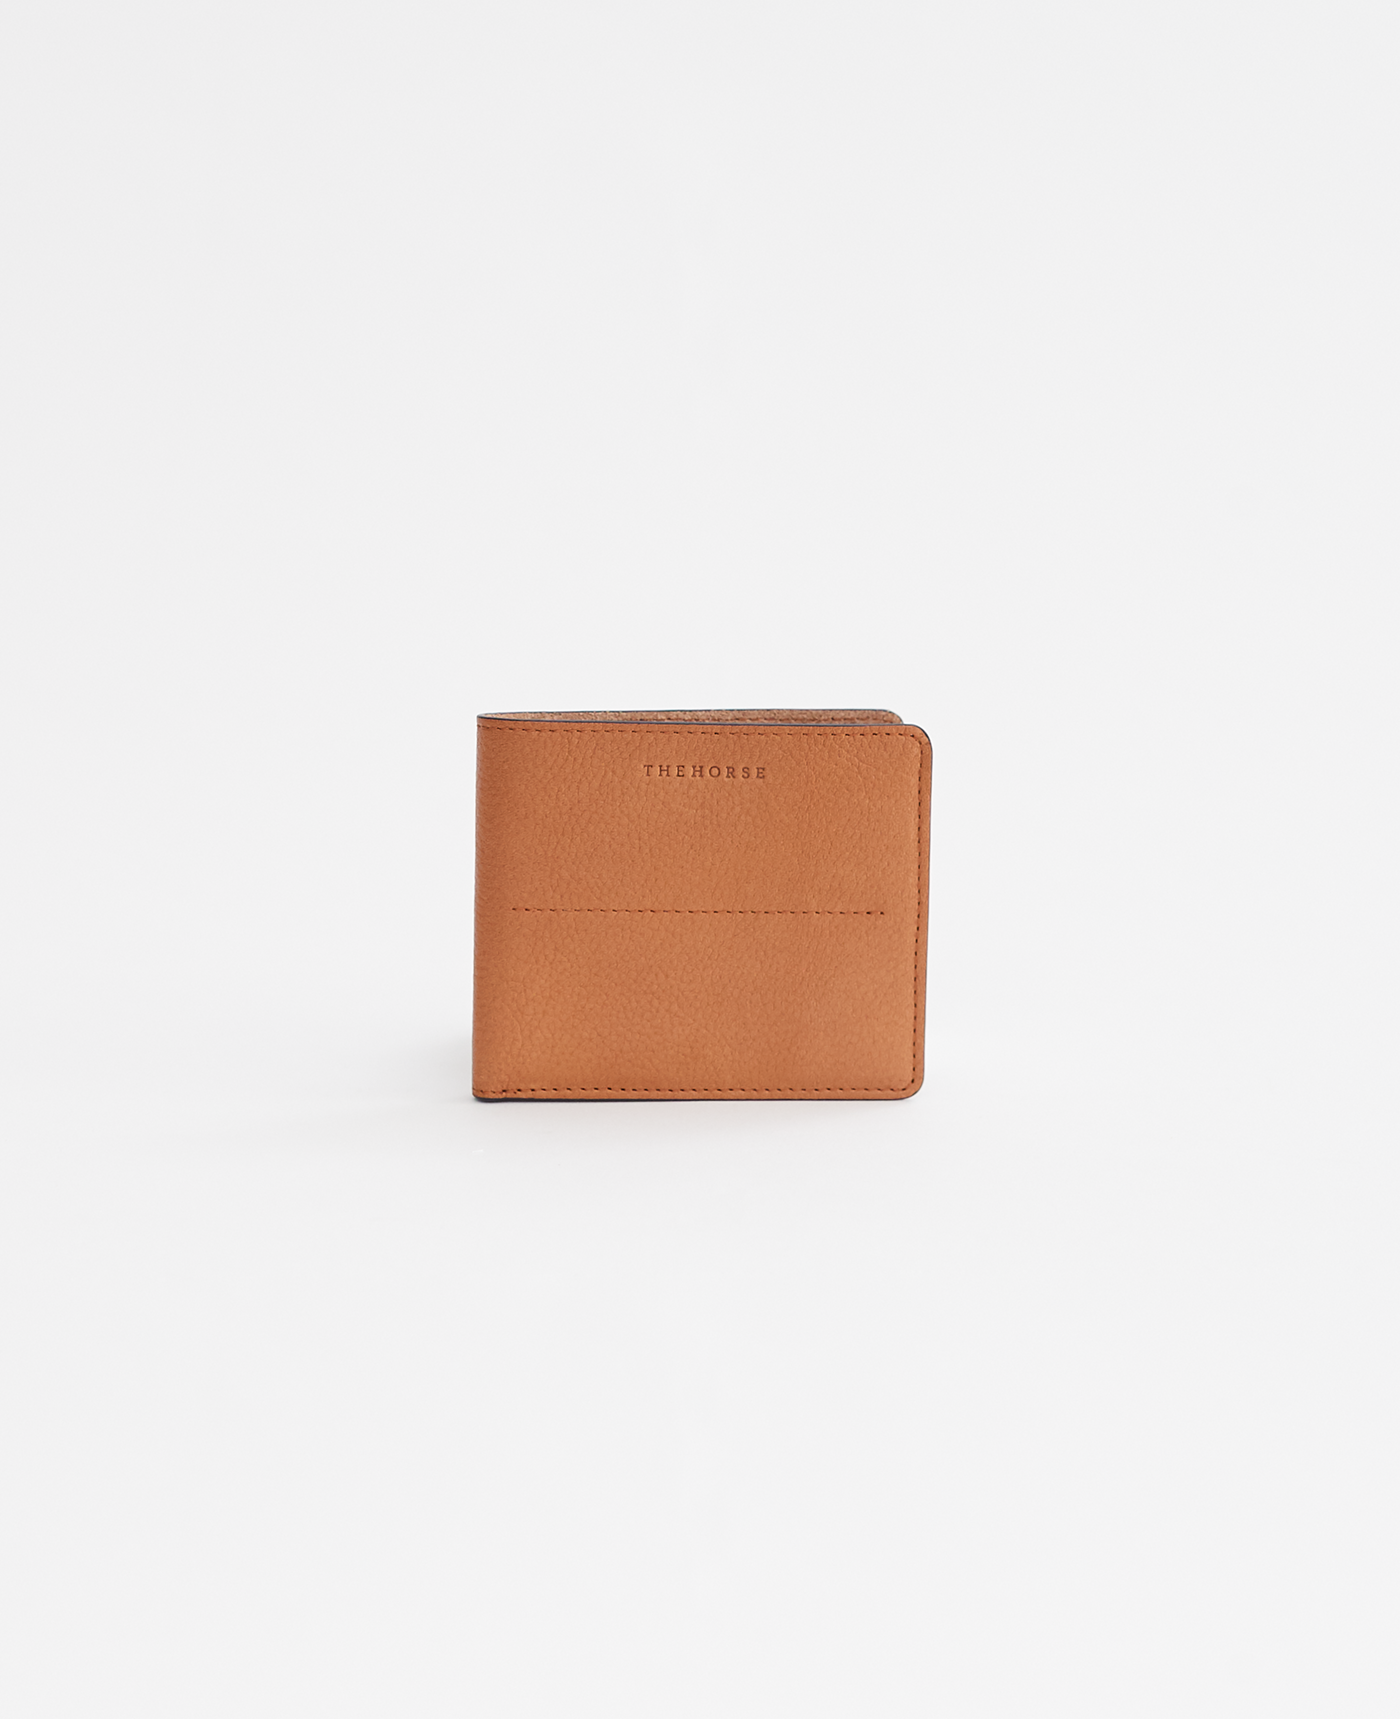 Barney Bi-fold Leather Wallet With Coin Pocket in Tan by The Horse